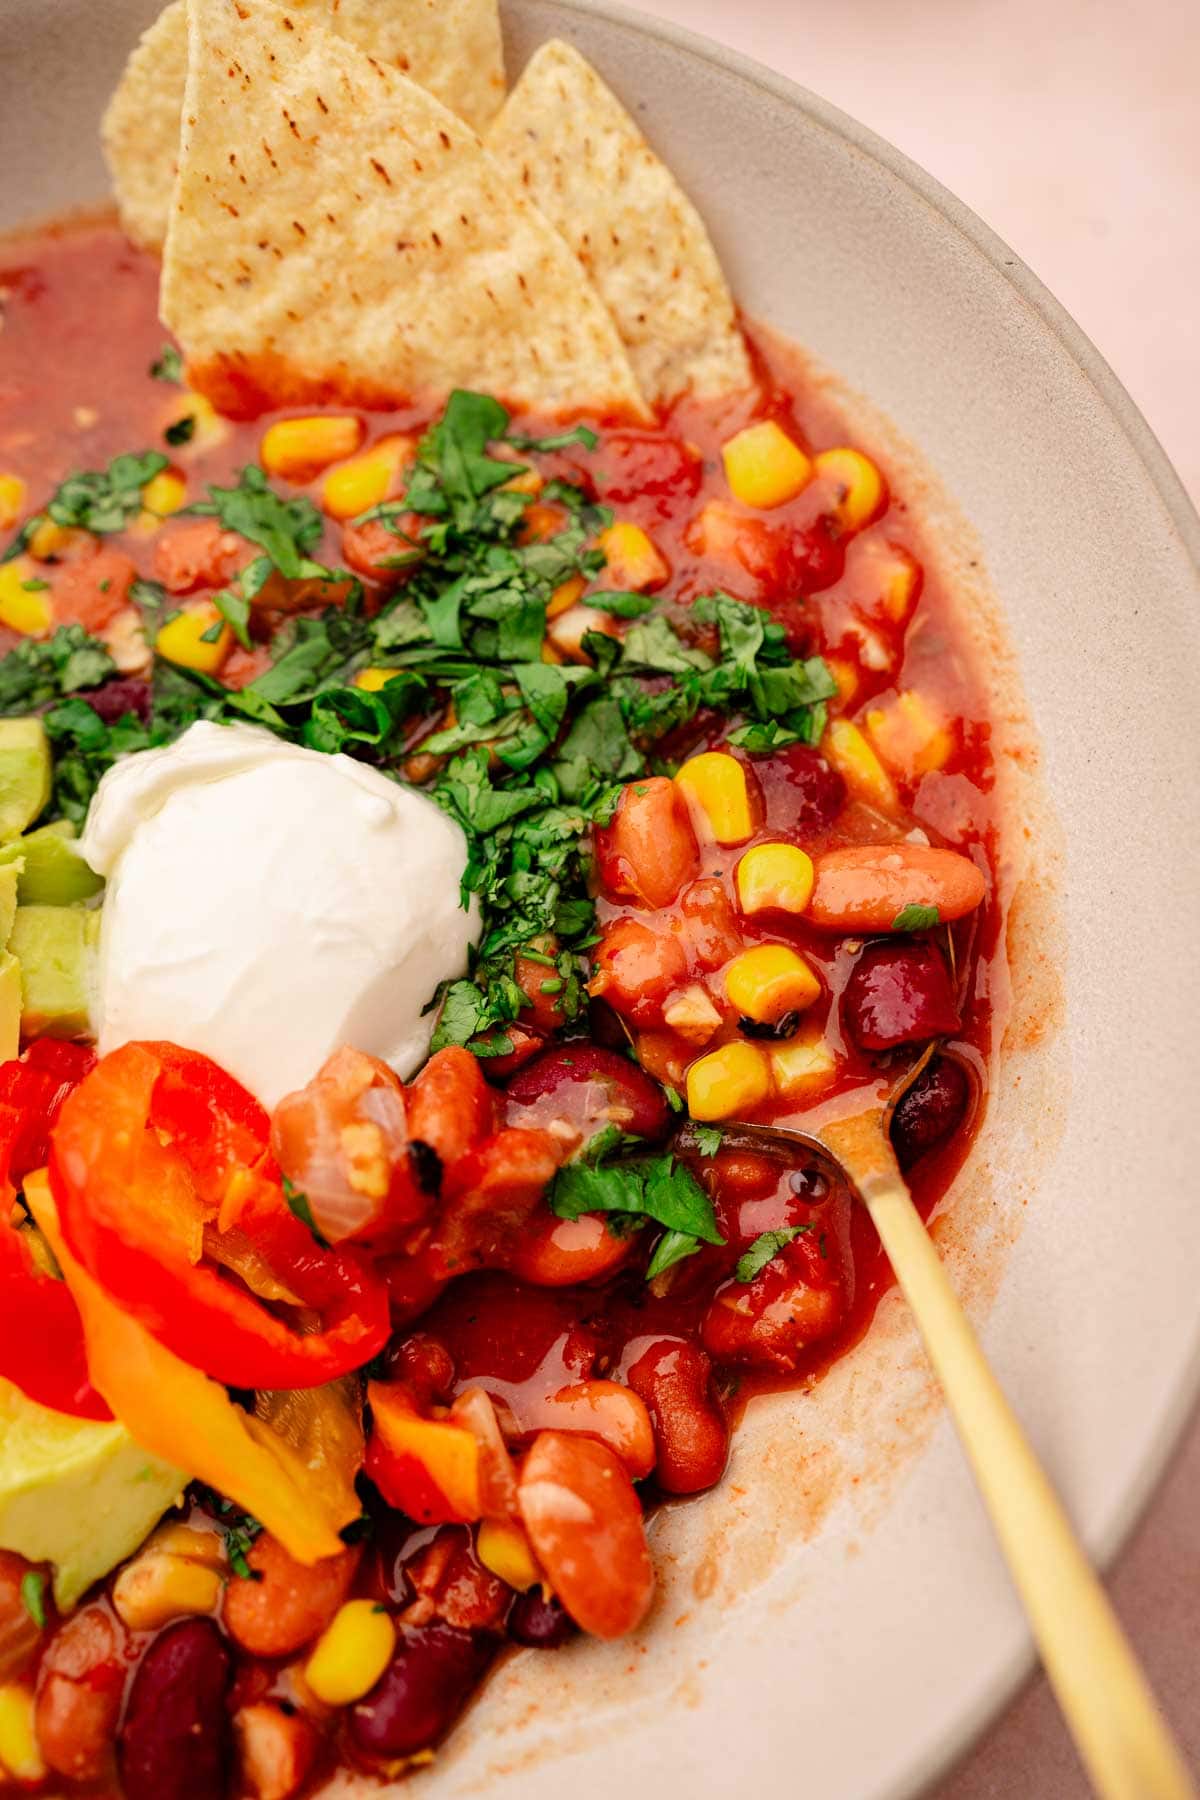 A hearty bowl of slow cooker vegetarian chili with a touch of sour cream and guacamole.